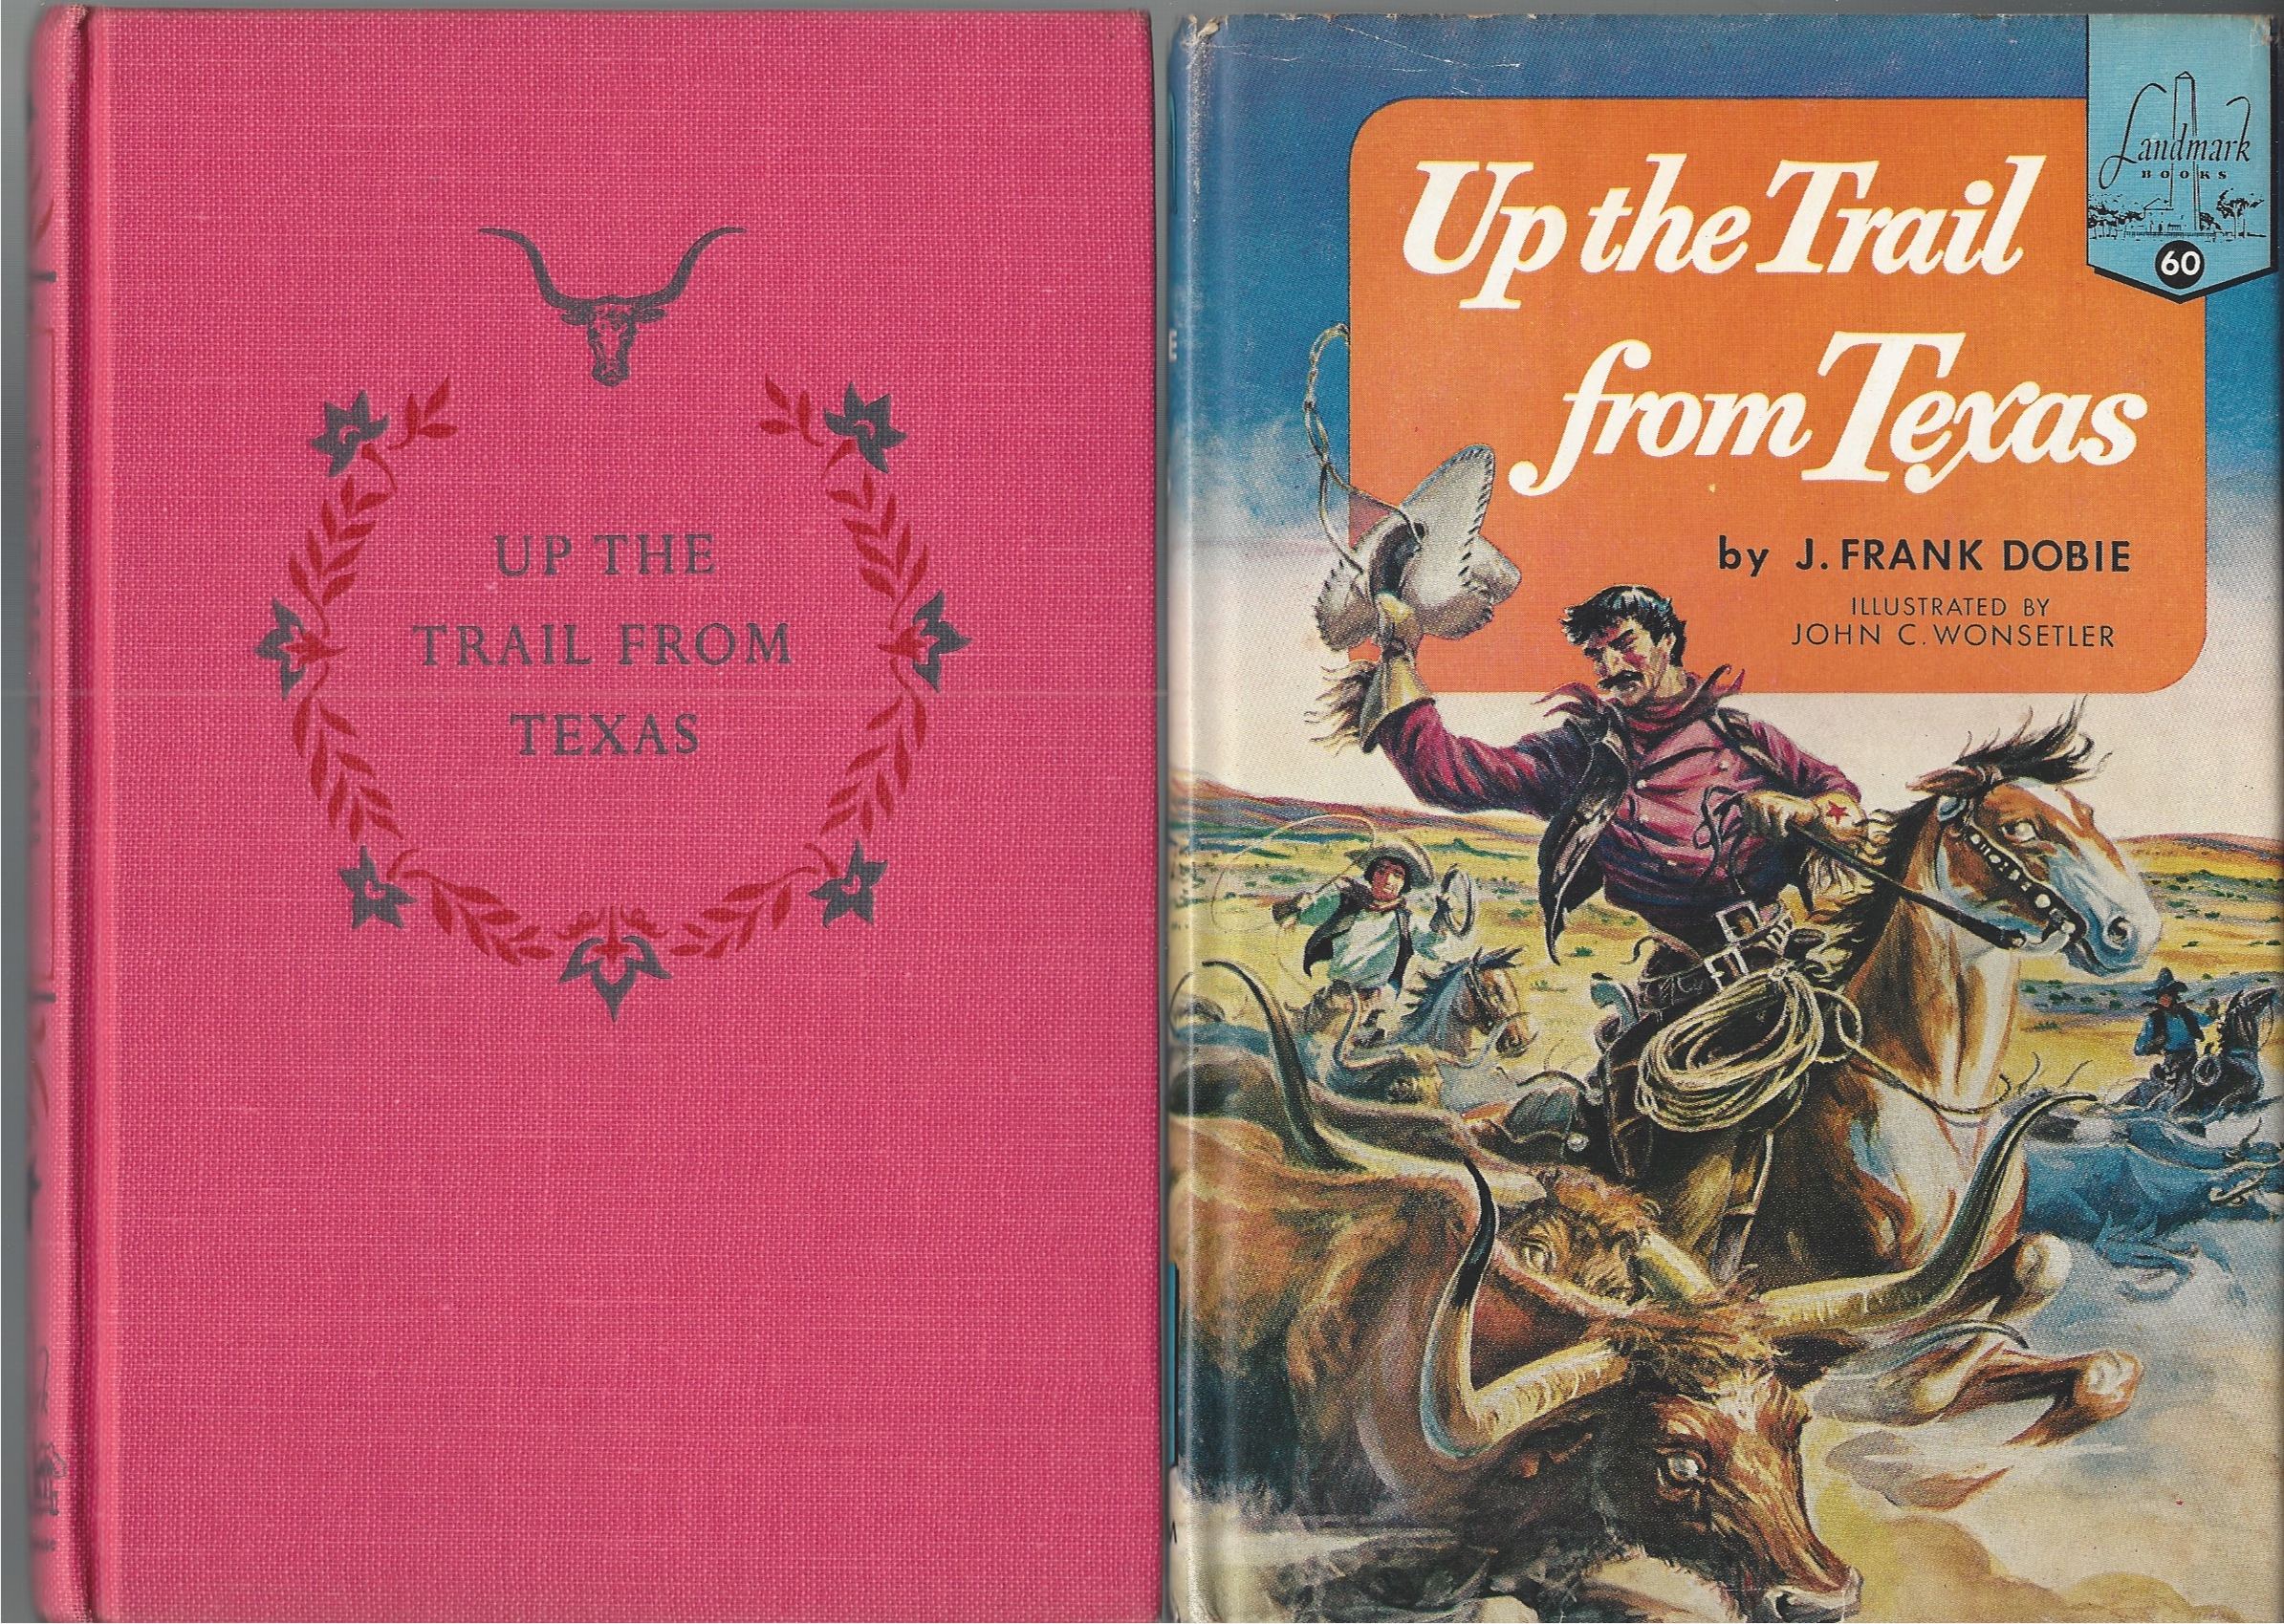 DOBIE FRANK J. - Up the Trail from Texas